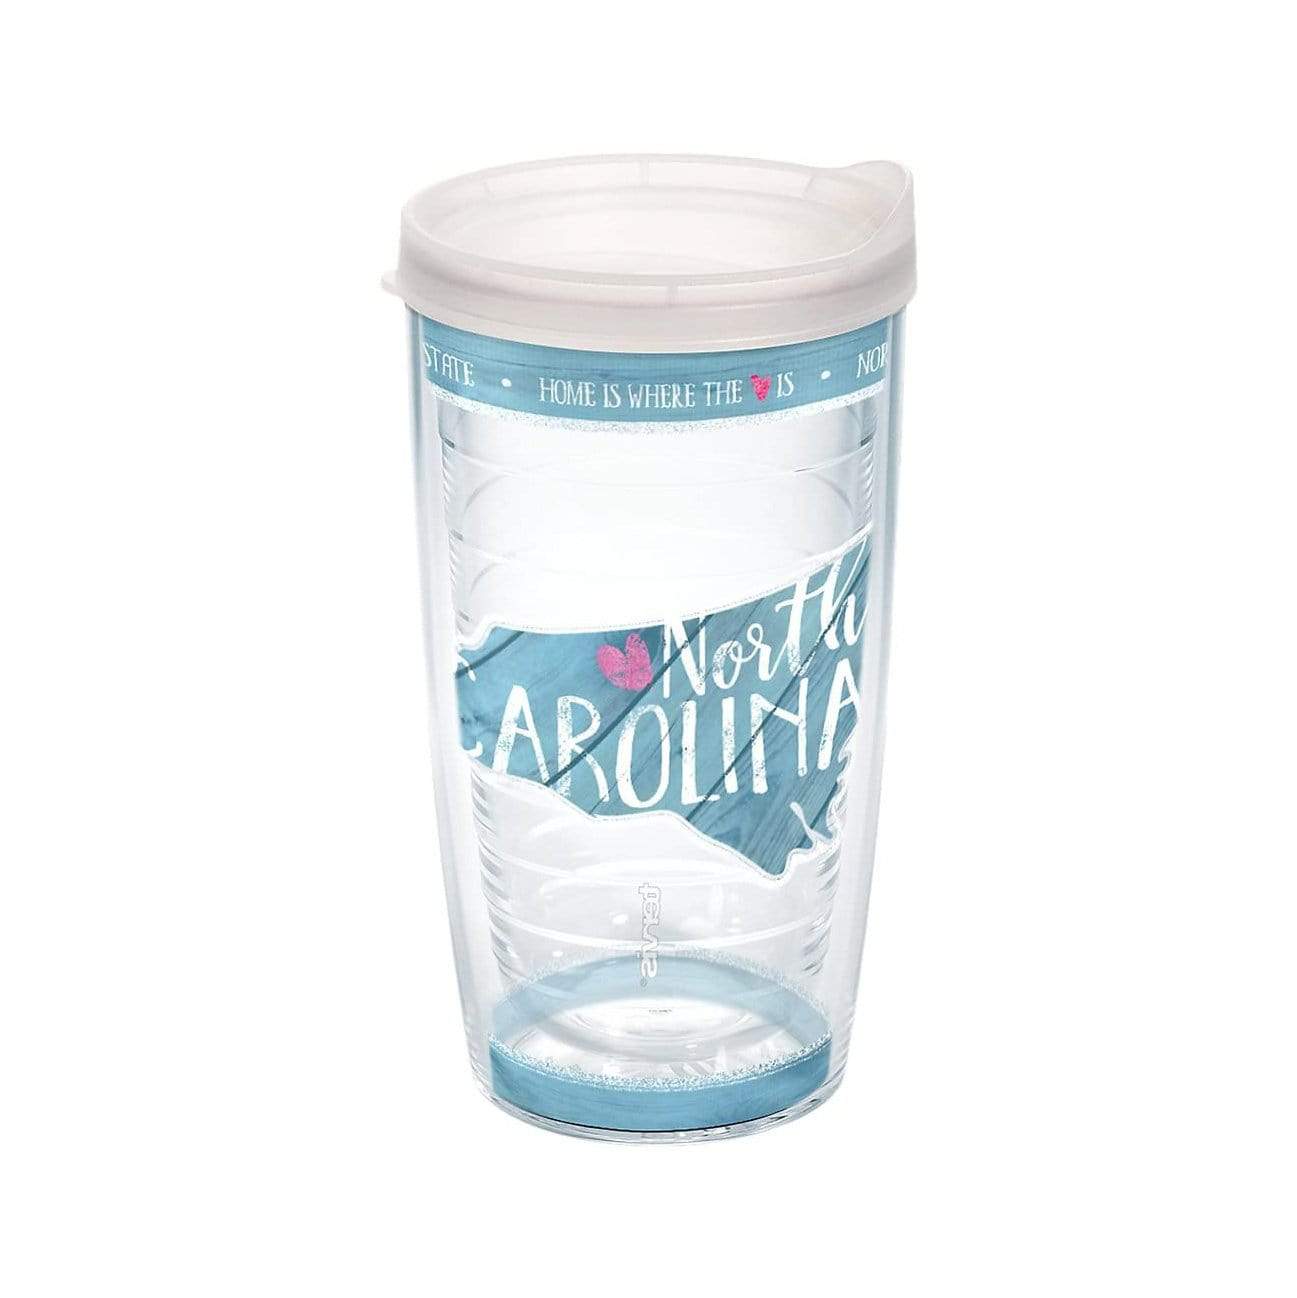 Tervis Tumbler Tervis Tumbler 16 oz North Carolina State Outline Wrap Tumbler With Lid